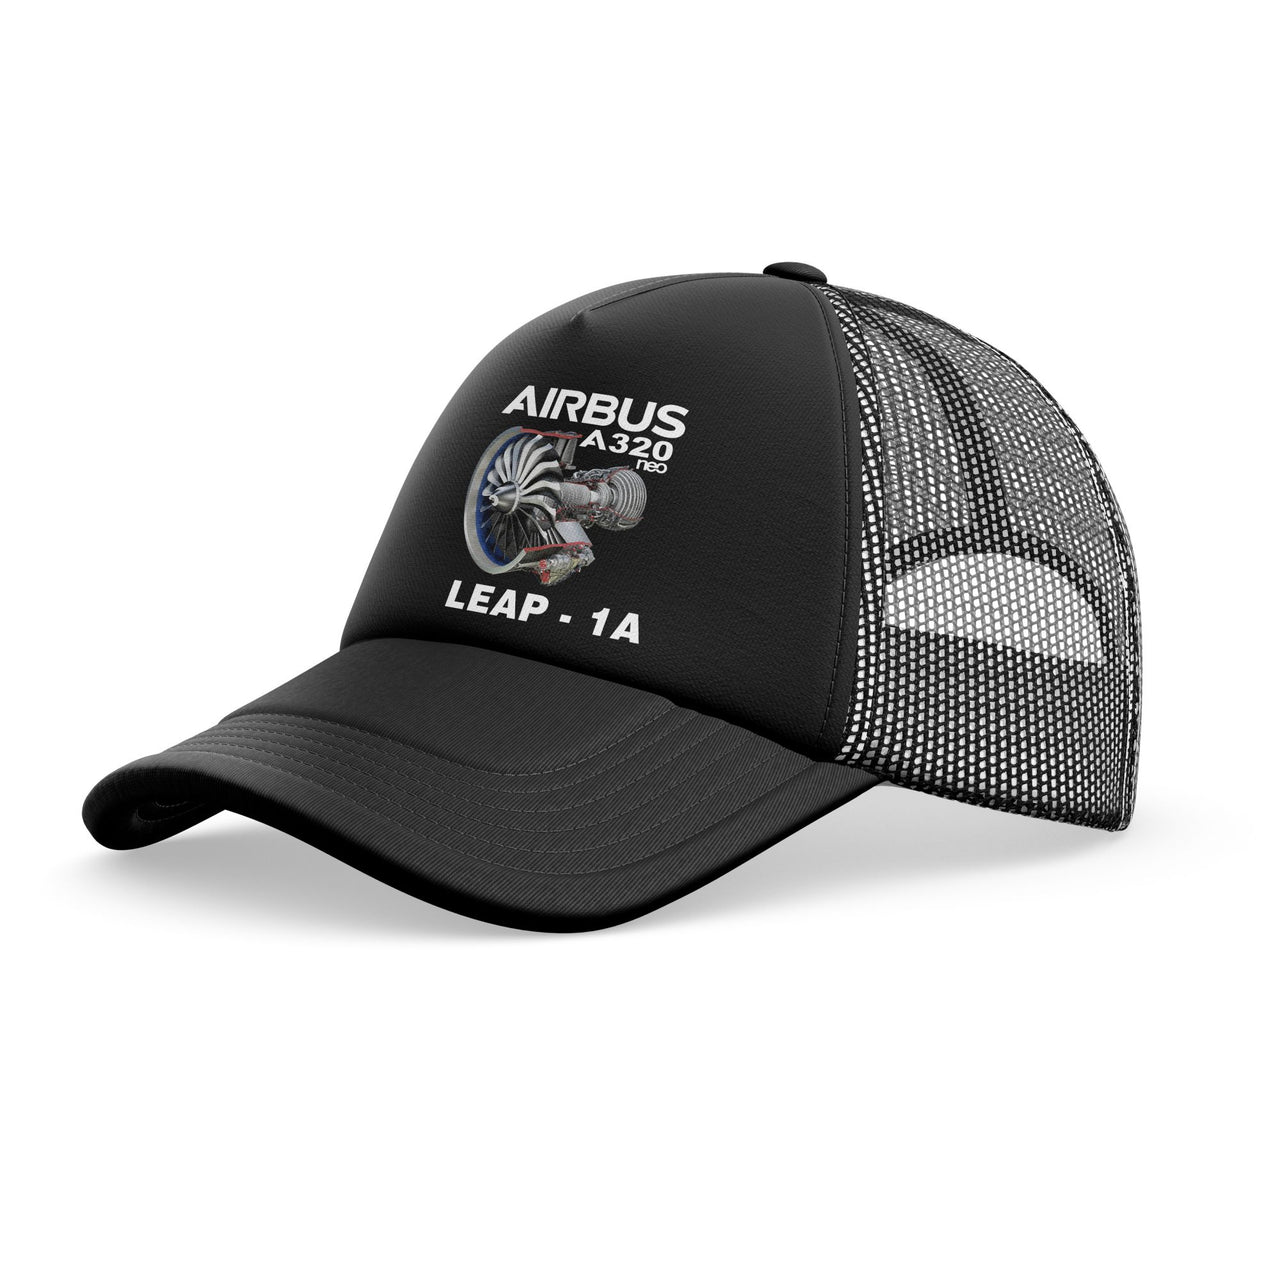 Airbus A320neo & Leap 1A Designed Trucker Caps & Hats